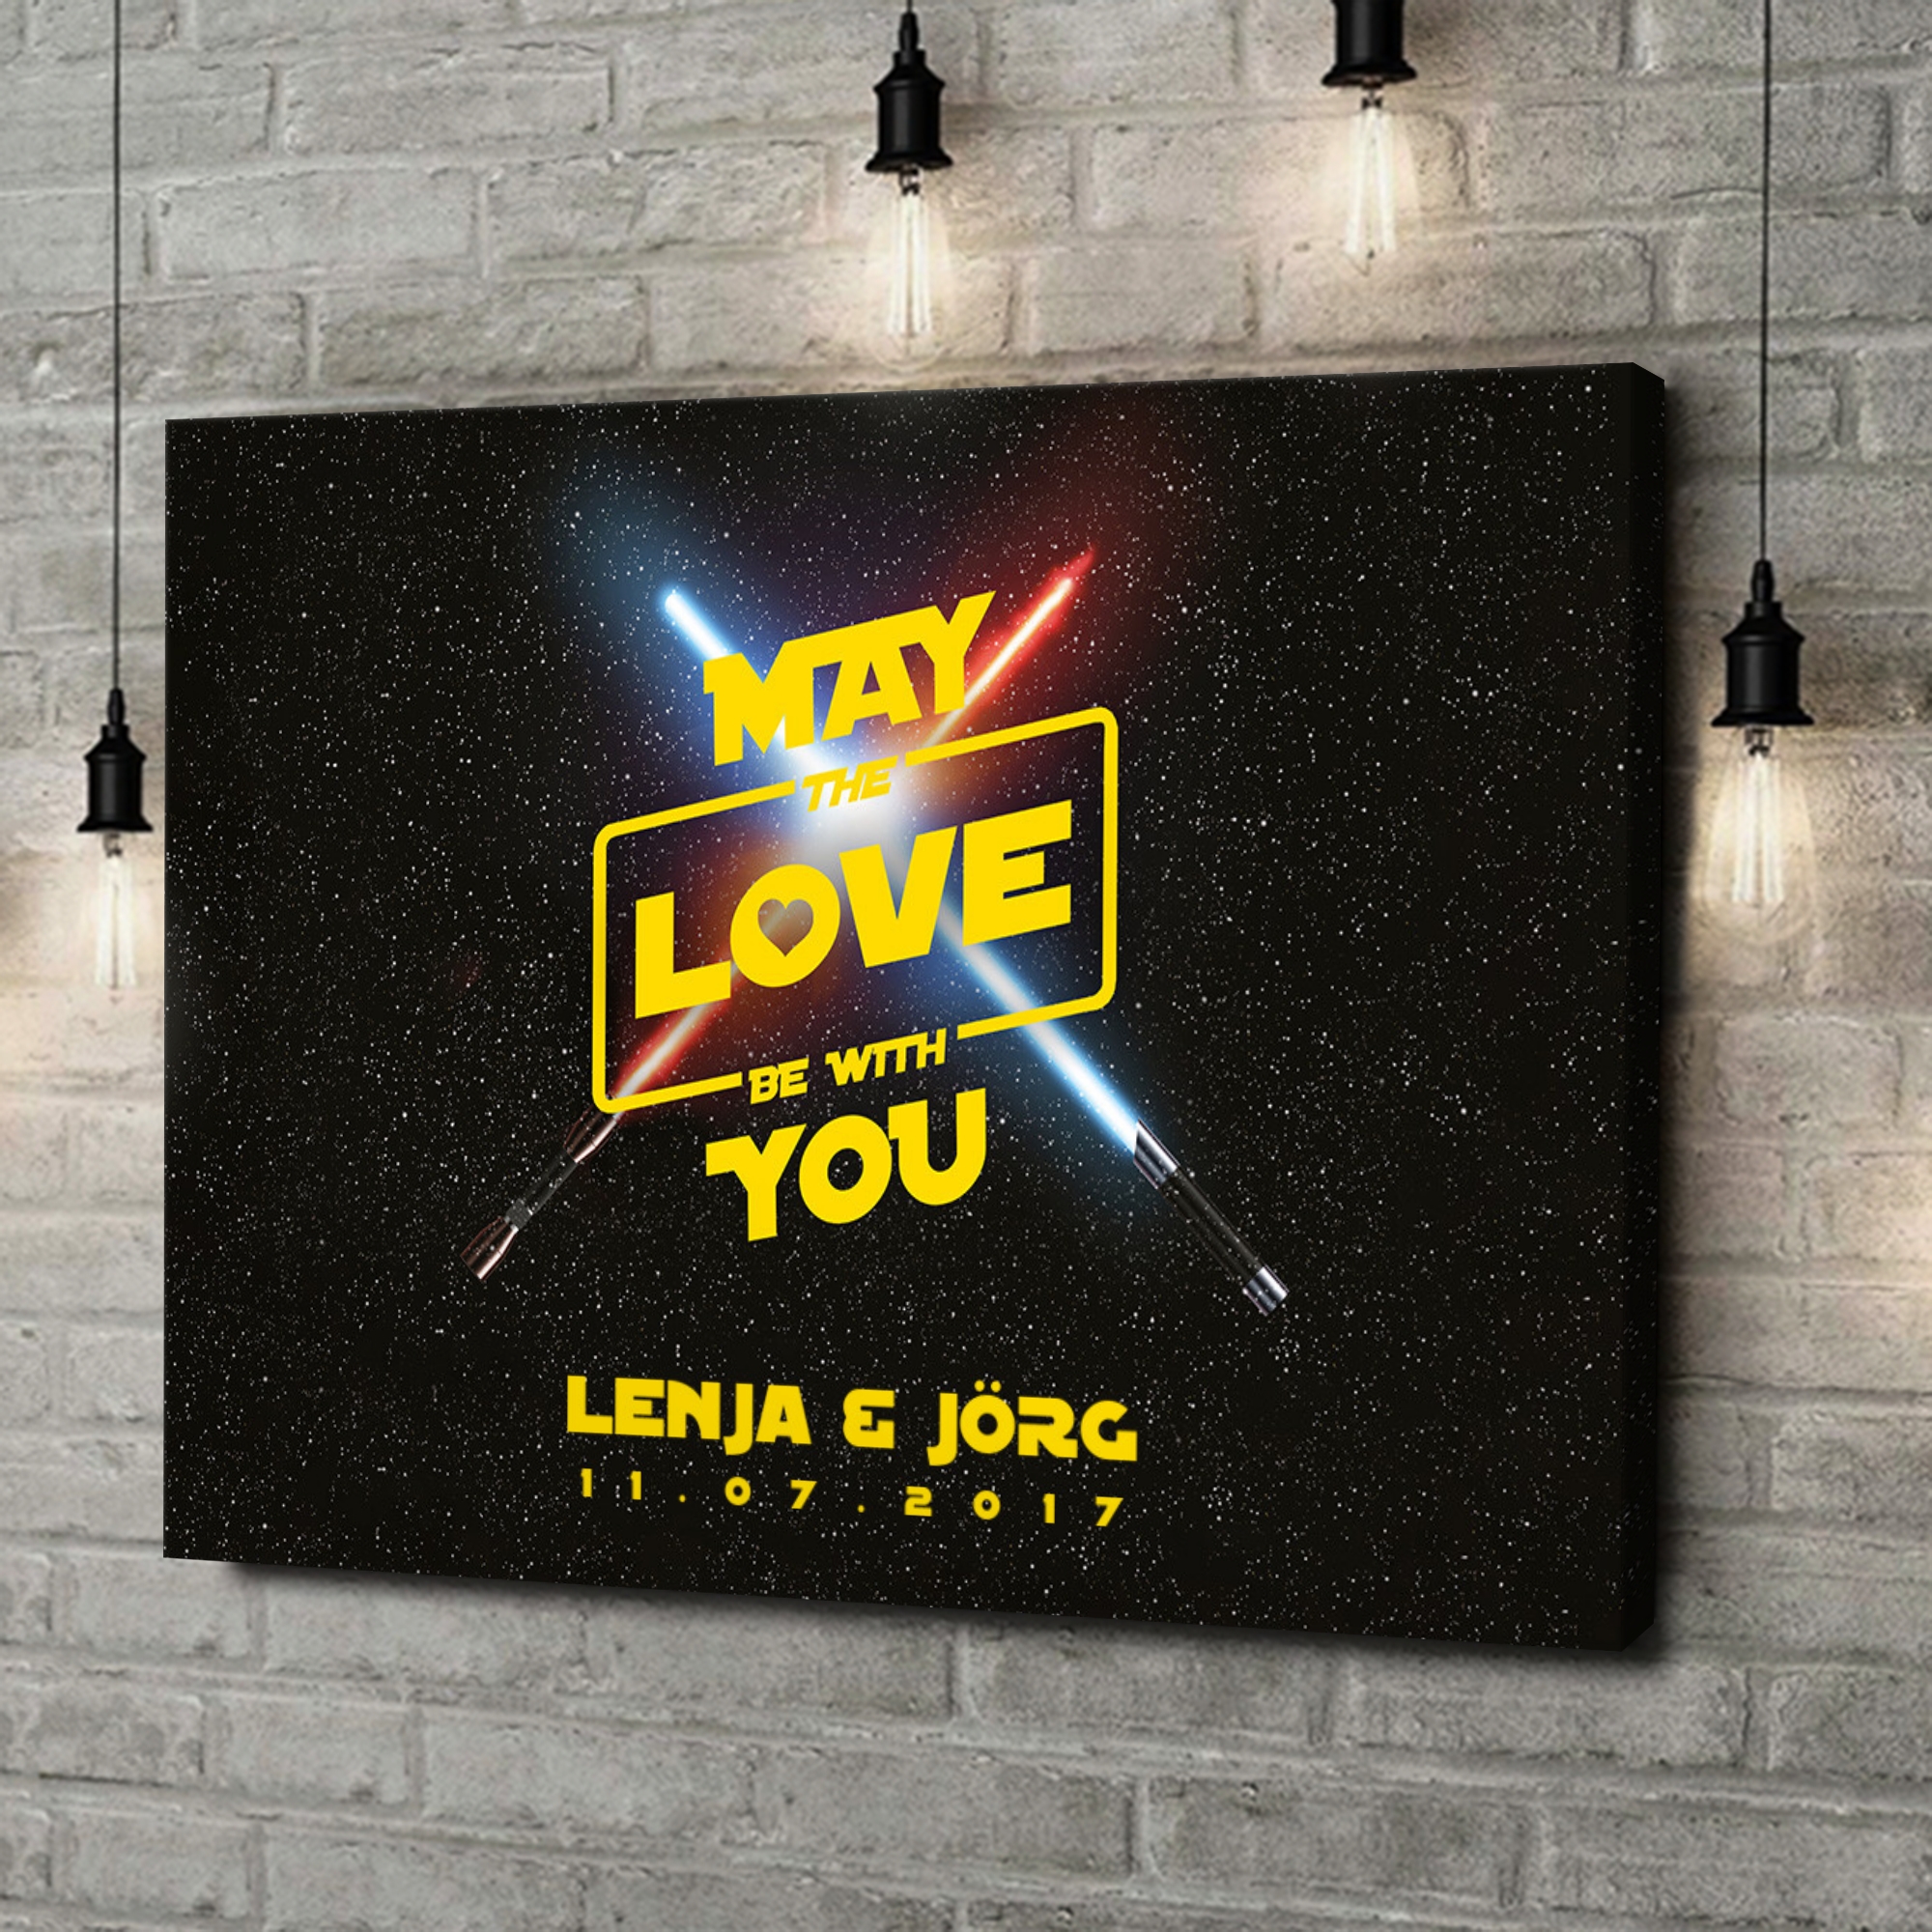 Liebesleinwand als Geschenk May The Love Be With You